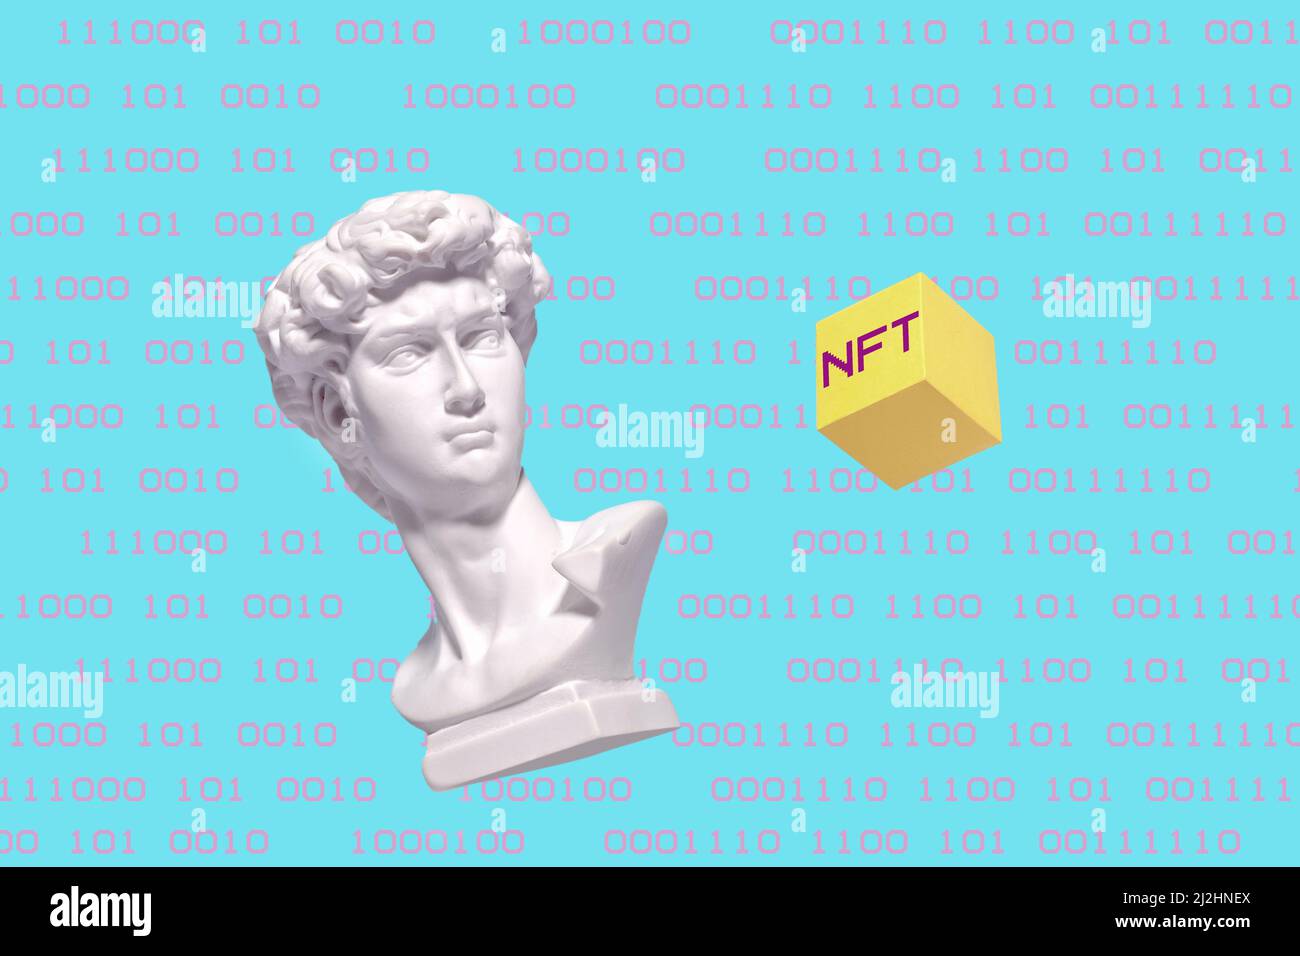 https://c8.alamy.com/comp/2J2HNEX/statue-of-a-bust-of-roman-david-and-cryptocurrency-nft-and-coding-minimal-concept-of-blockchain-and-art-2J2HNEX.jpg